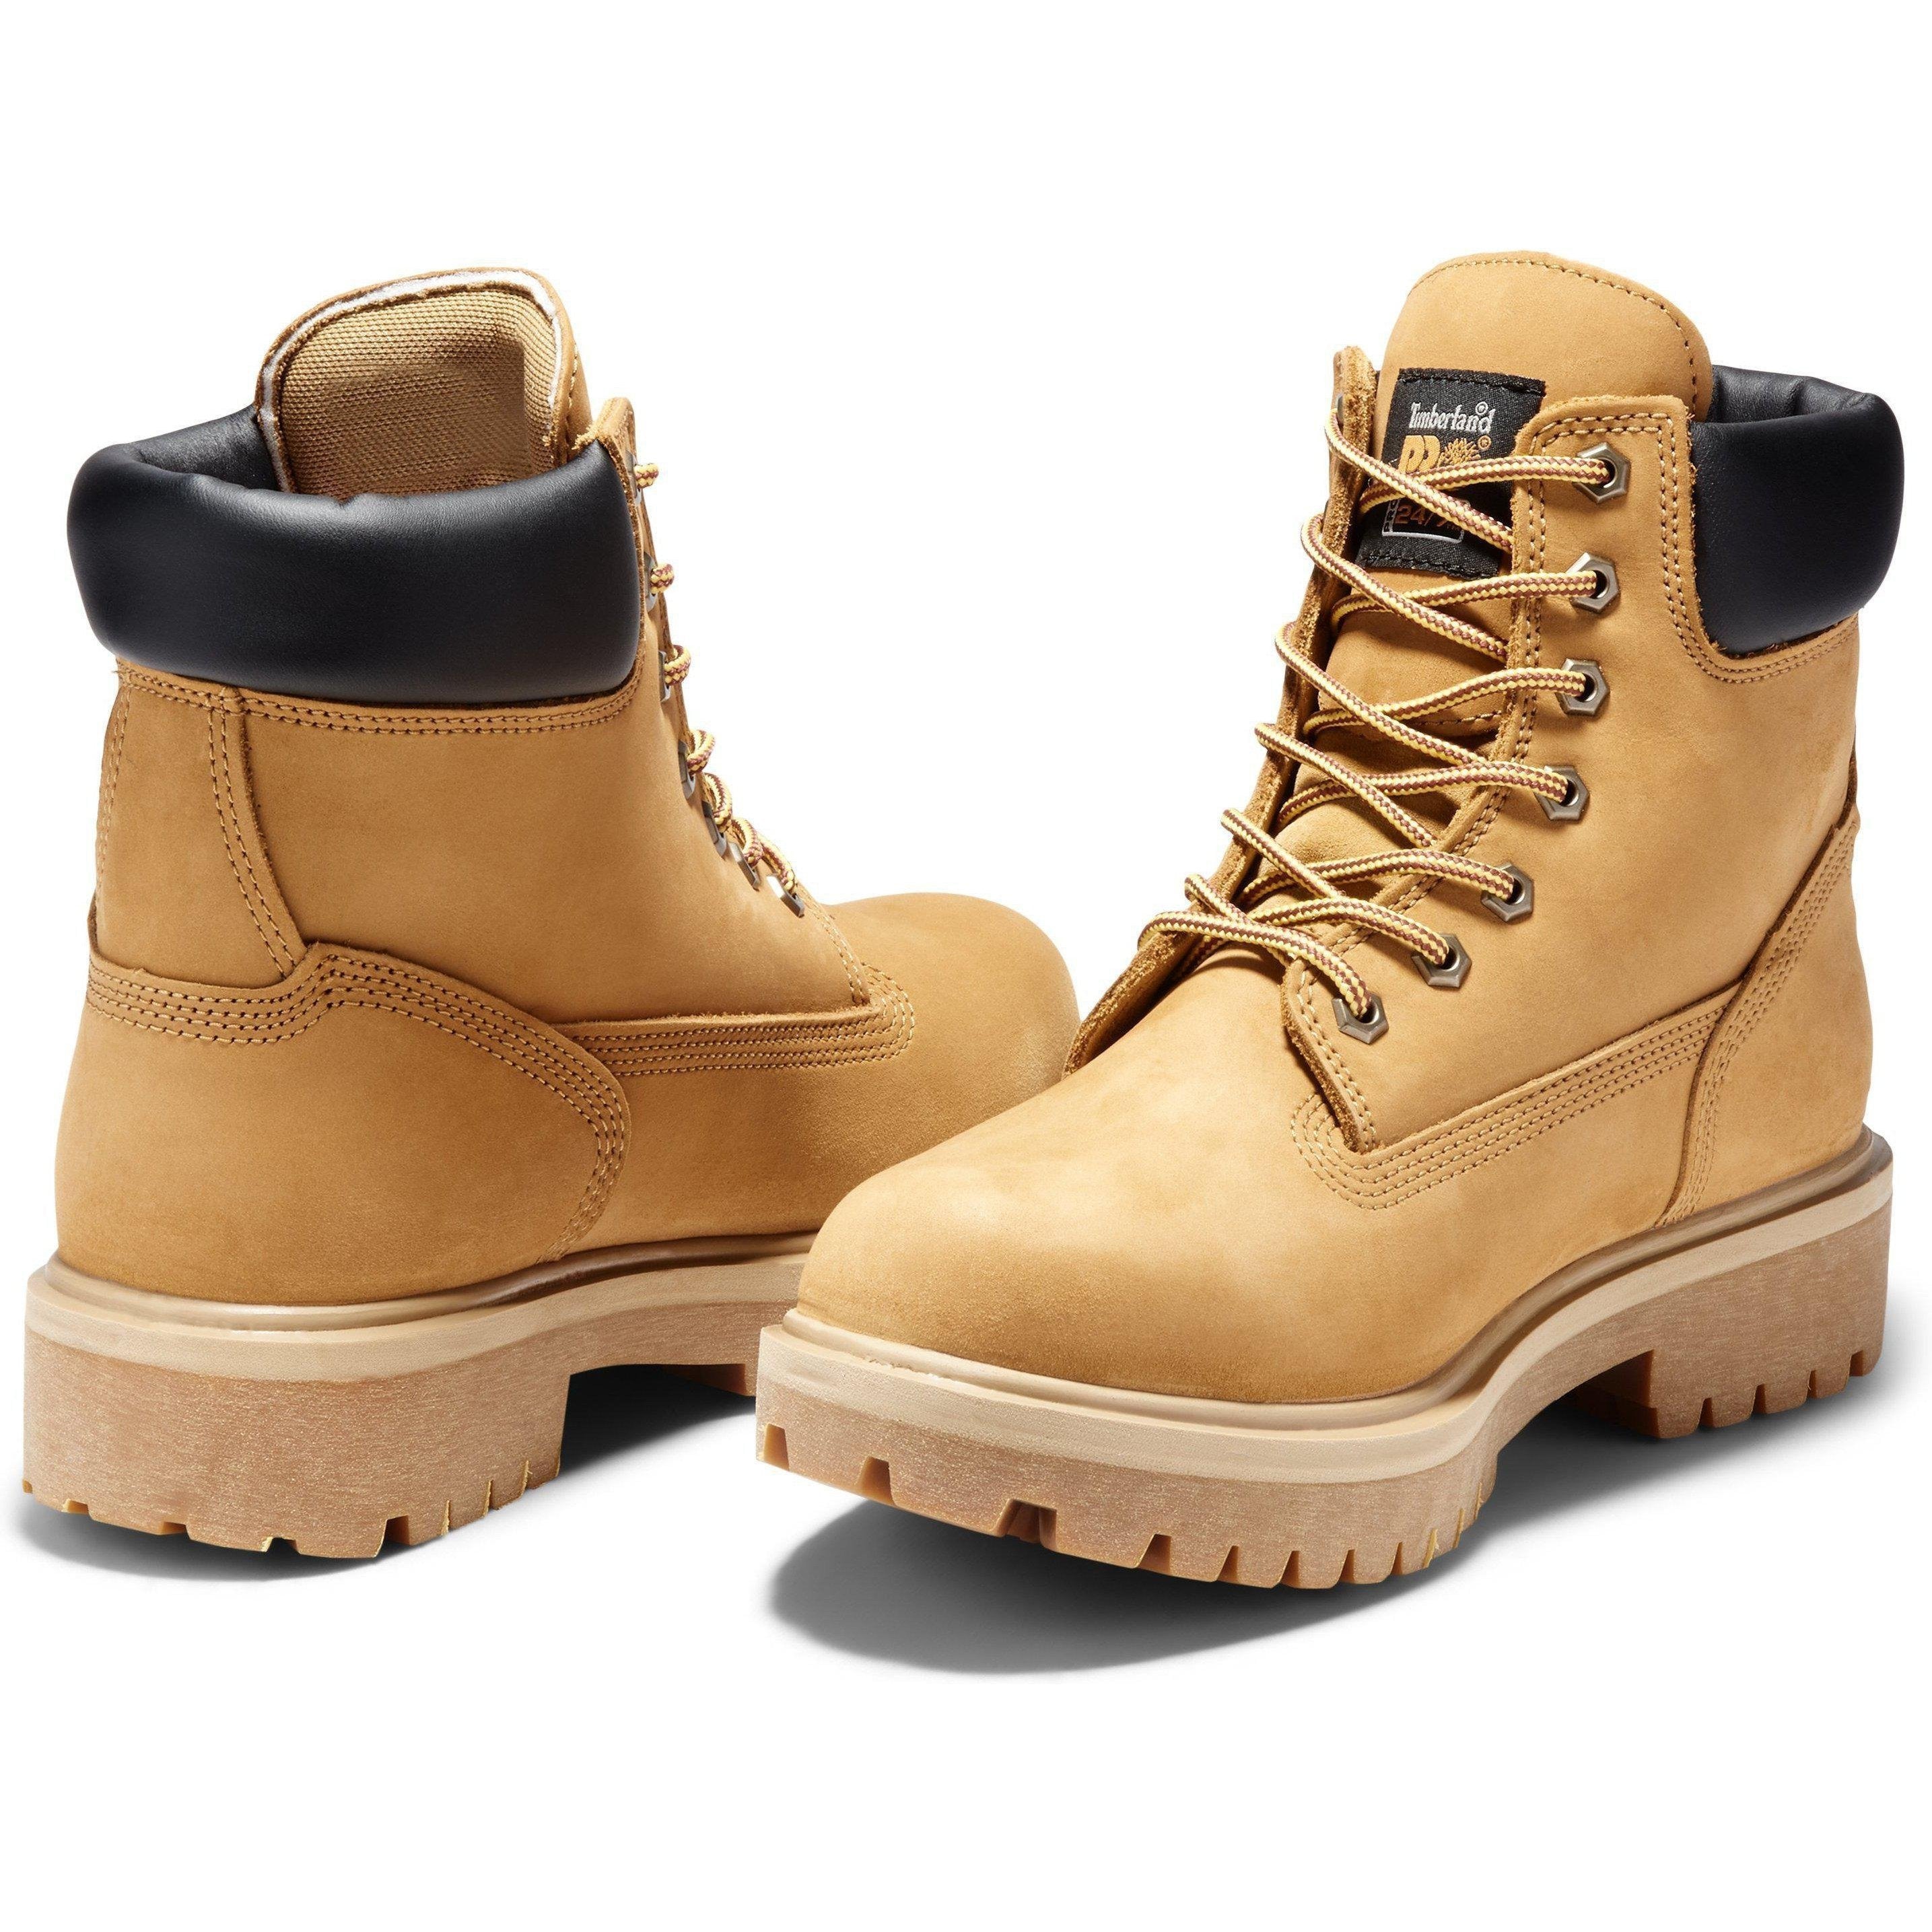 Timberland PRO Men's Direct Attach 6" Steel Toe Work Boot-TB065016713  - Overlook Boots